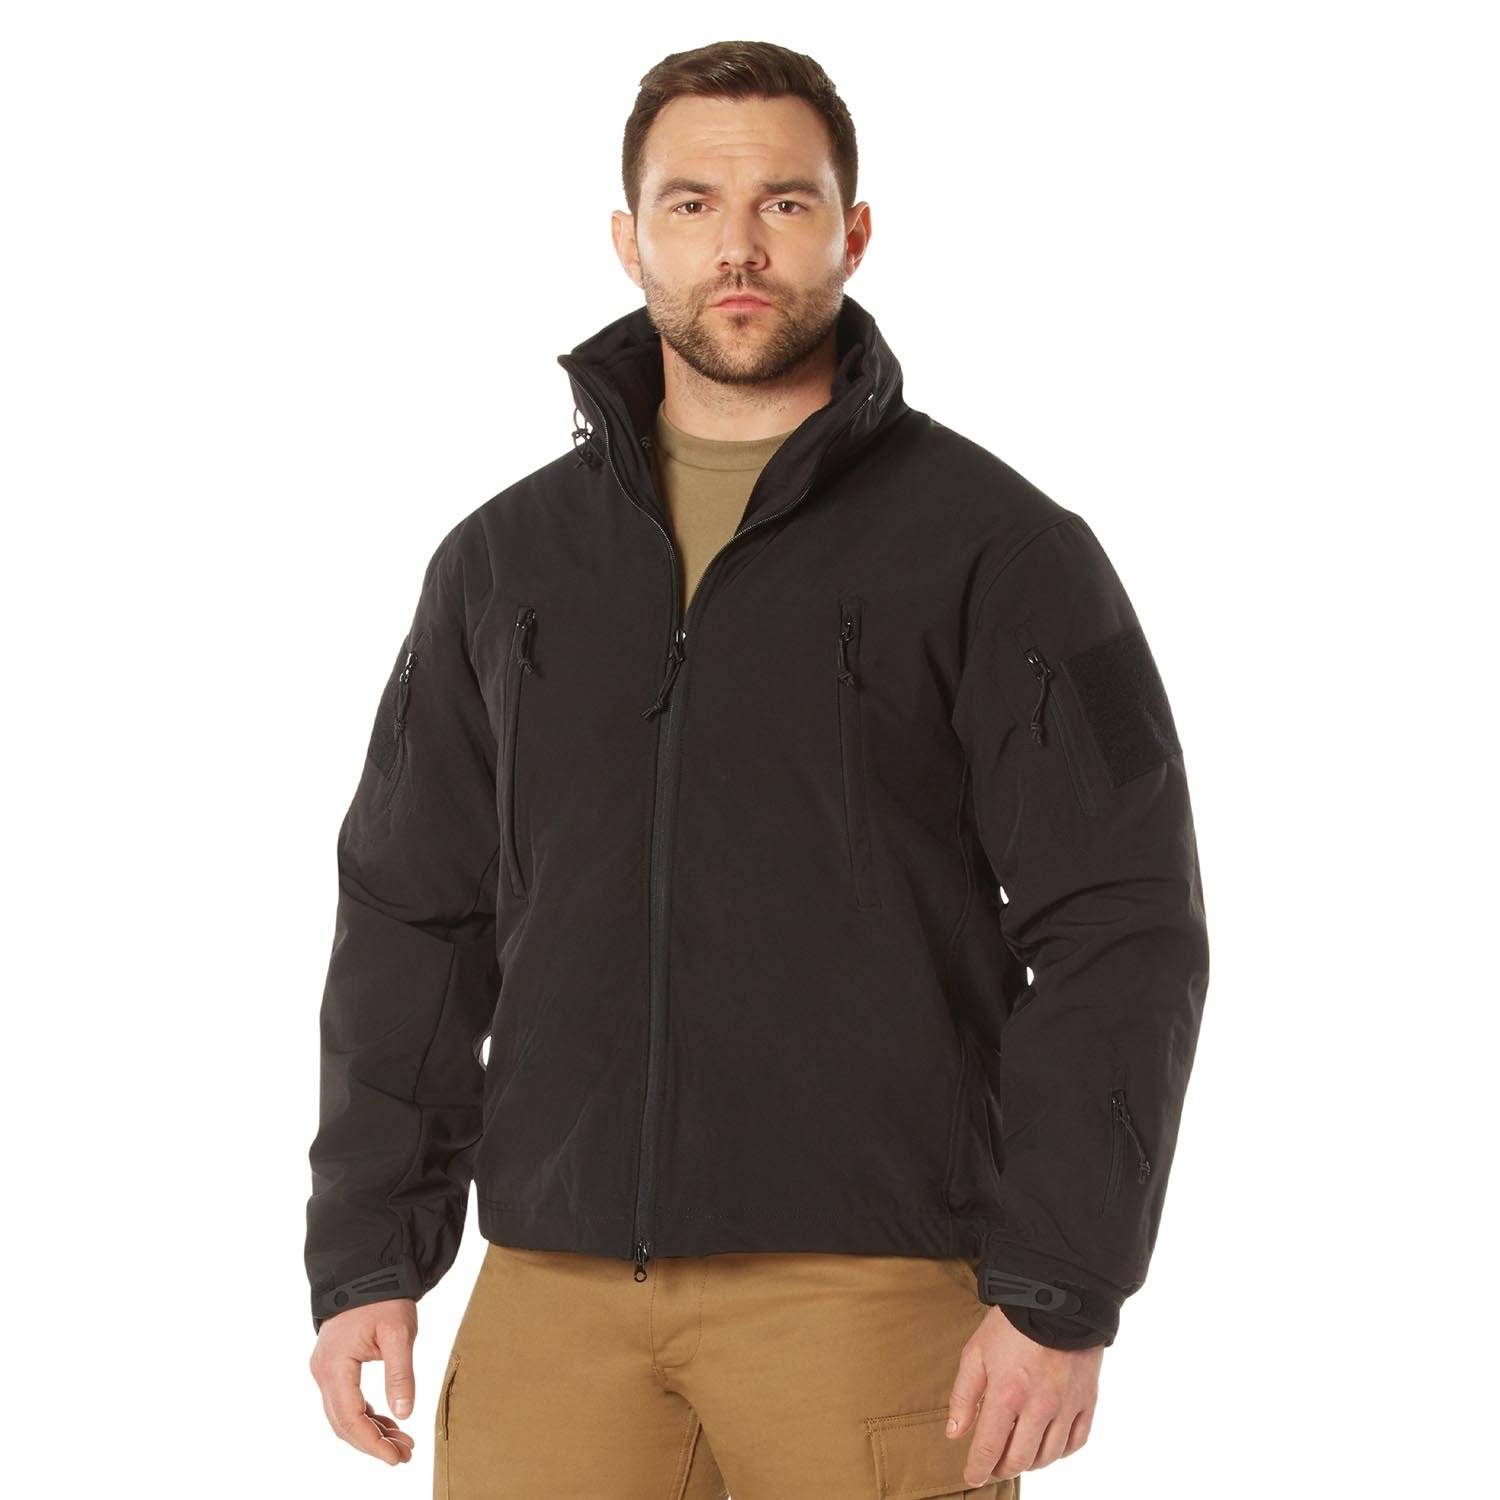 Rothco 3-in-1 Spec Ops Soft Jacket